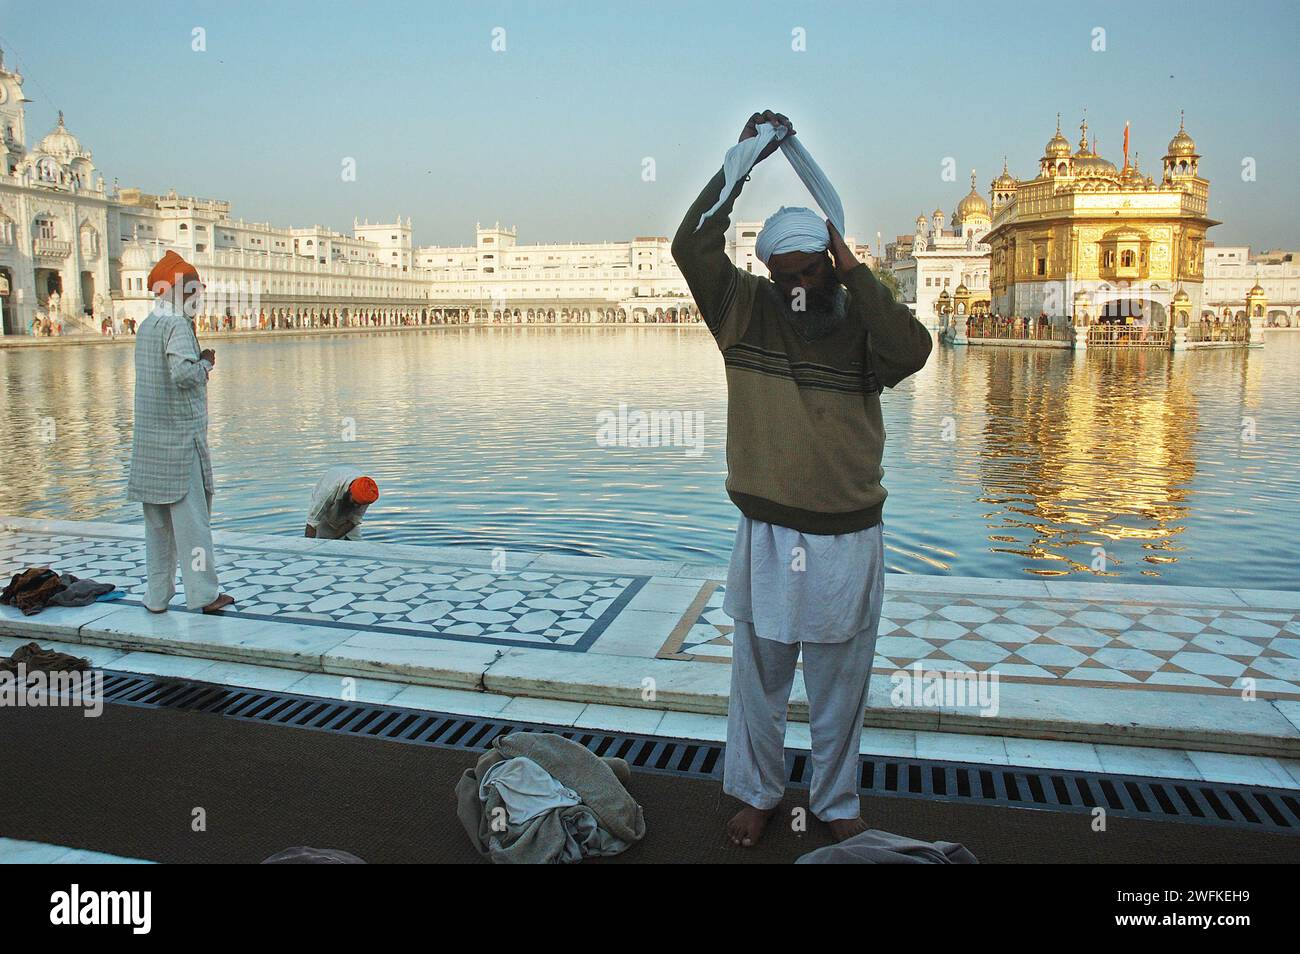 The Harmandir Sahib (or Hari Mandir) in Amritsar, Punjab, is the holiest shrine in Sikhism. Known as the Golden Temple, it was officially renamed Harmandir Sahib in March 2005. The temple (or gurdwara) is a major pilgrimage destination for Sikhs from all over the world, as well as an increasingly popular tourist attraction. The glorious temple is a living example of the spirit of tolerance and acceptance that the Sikh philosophy propounds. Amritsar, Punjab, India. Stock Photo